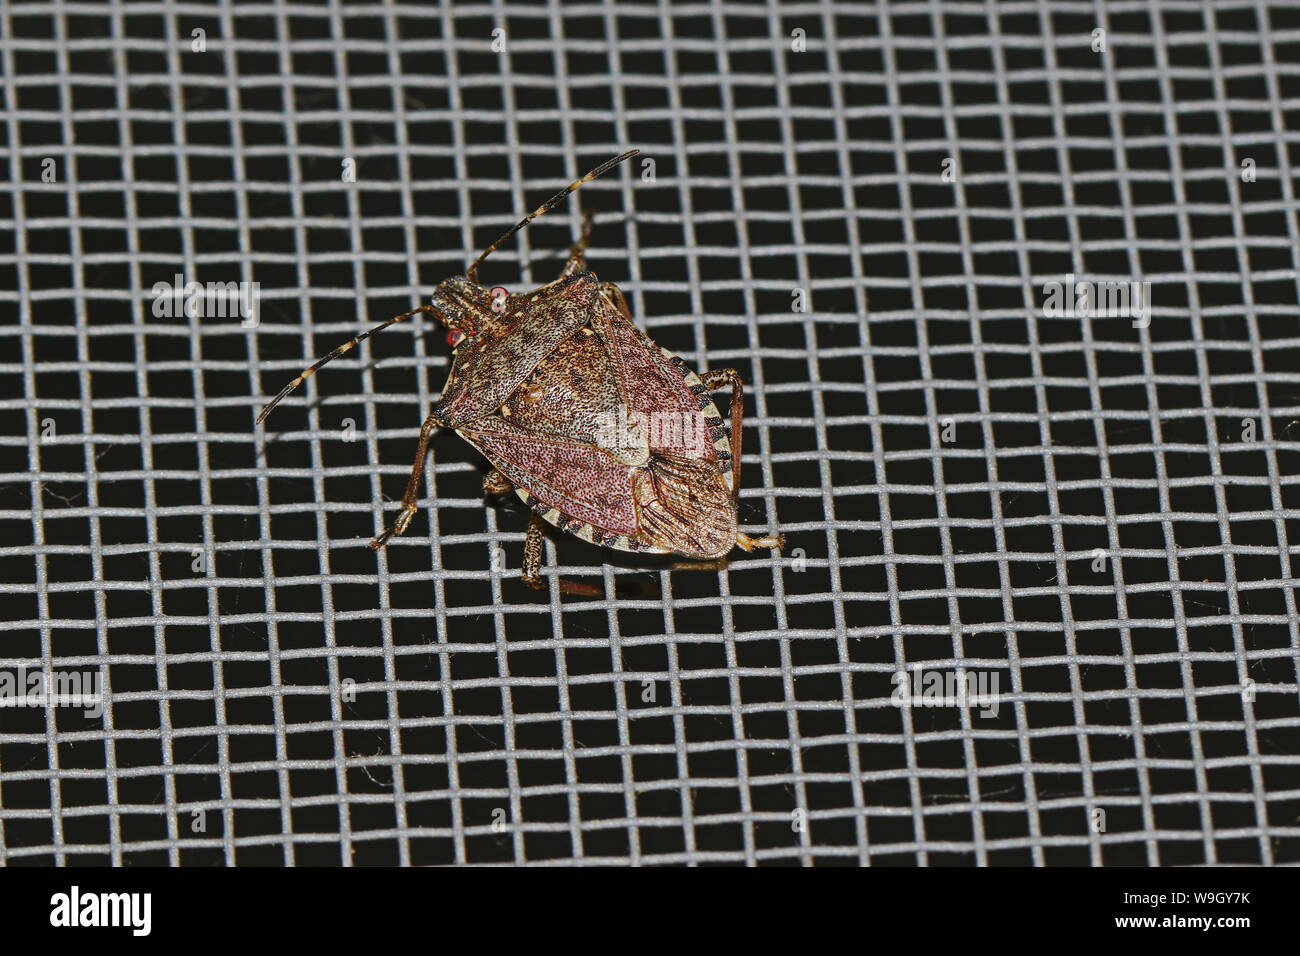 brown marmorated stink bug or shield bug Latin halyomorpha halys from the pentatomidae family in Italy native to Asia a serious pest in Europe and USA Stock Photo